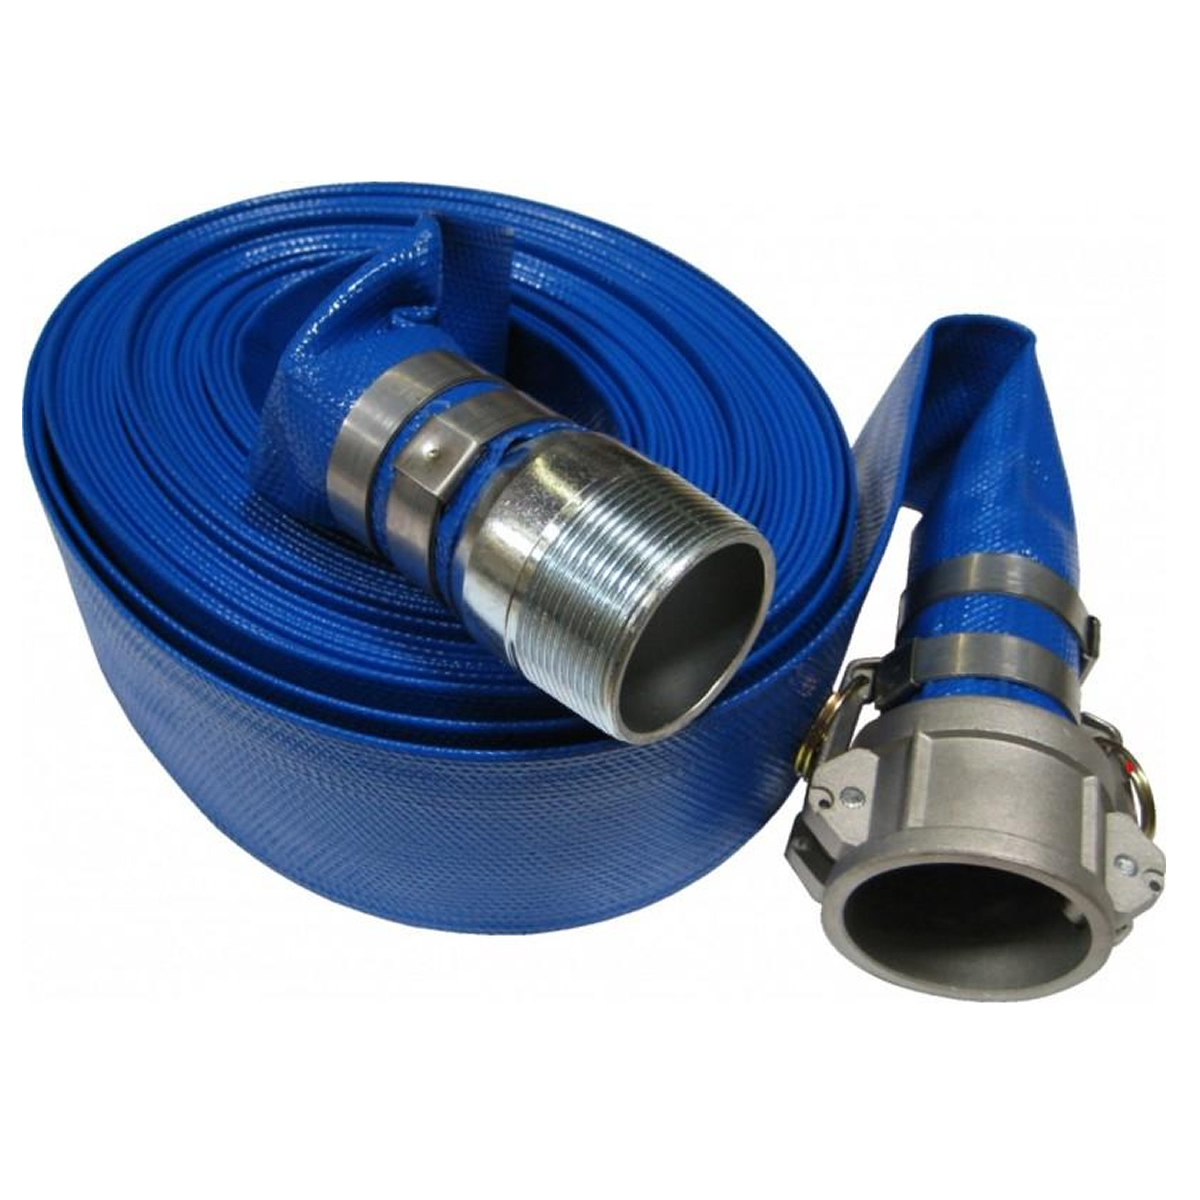 Duro Max Xph0350d 3 In. X 50ft. Water Pump Discharge Hose